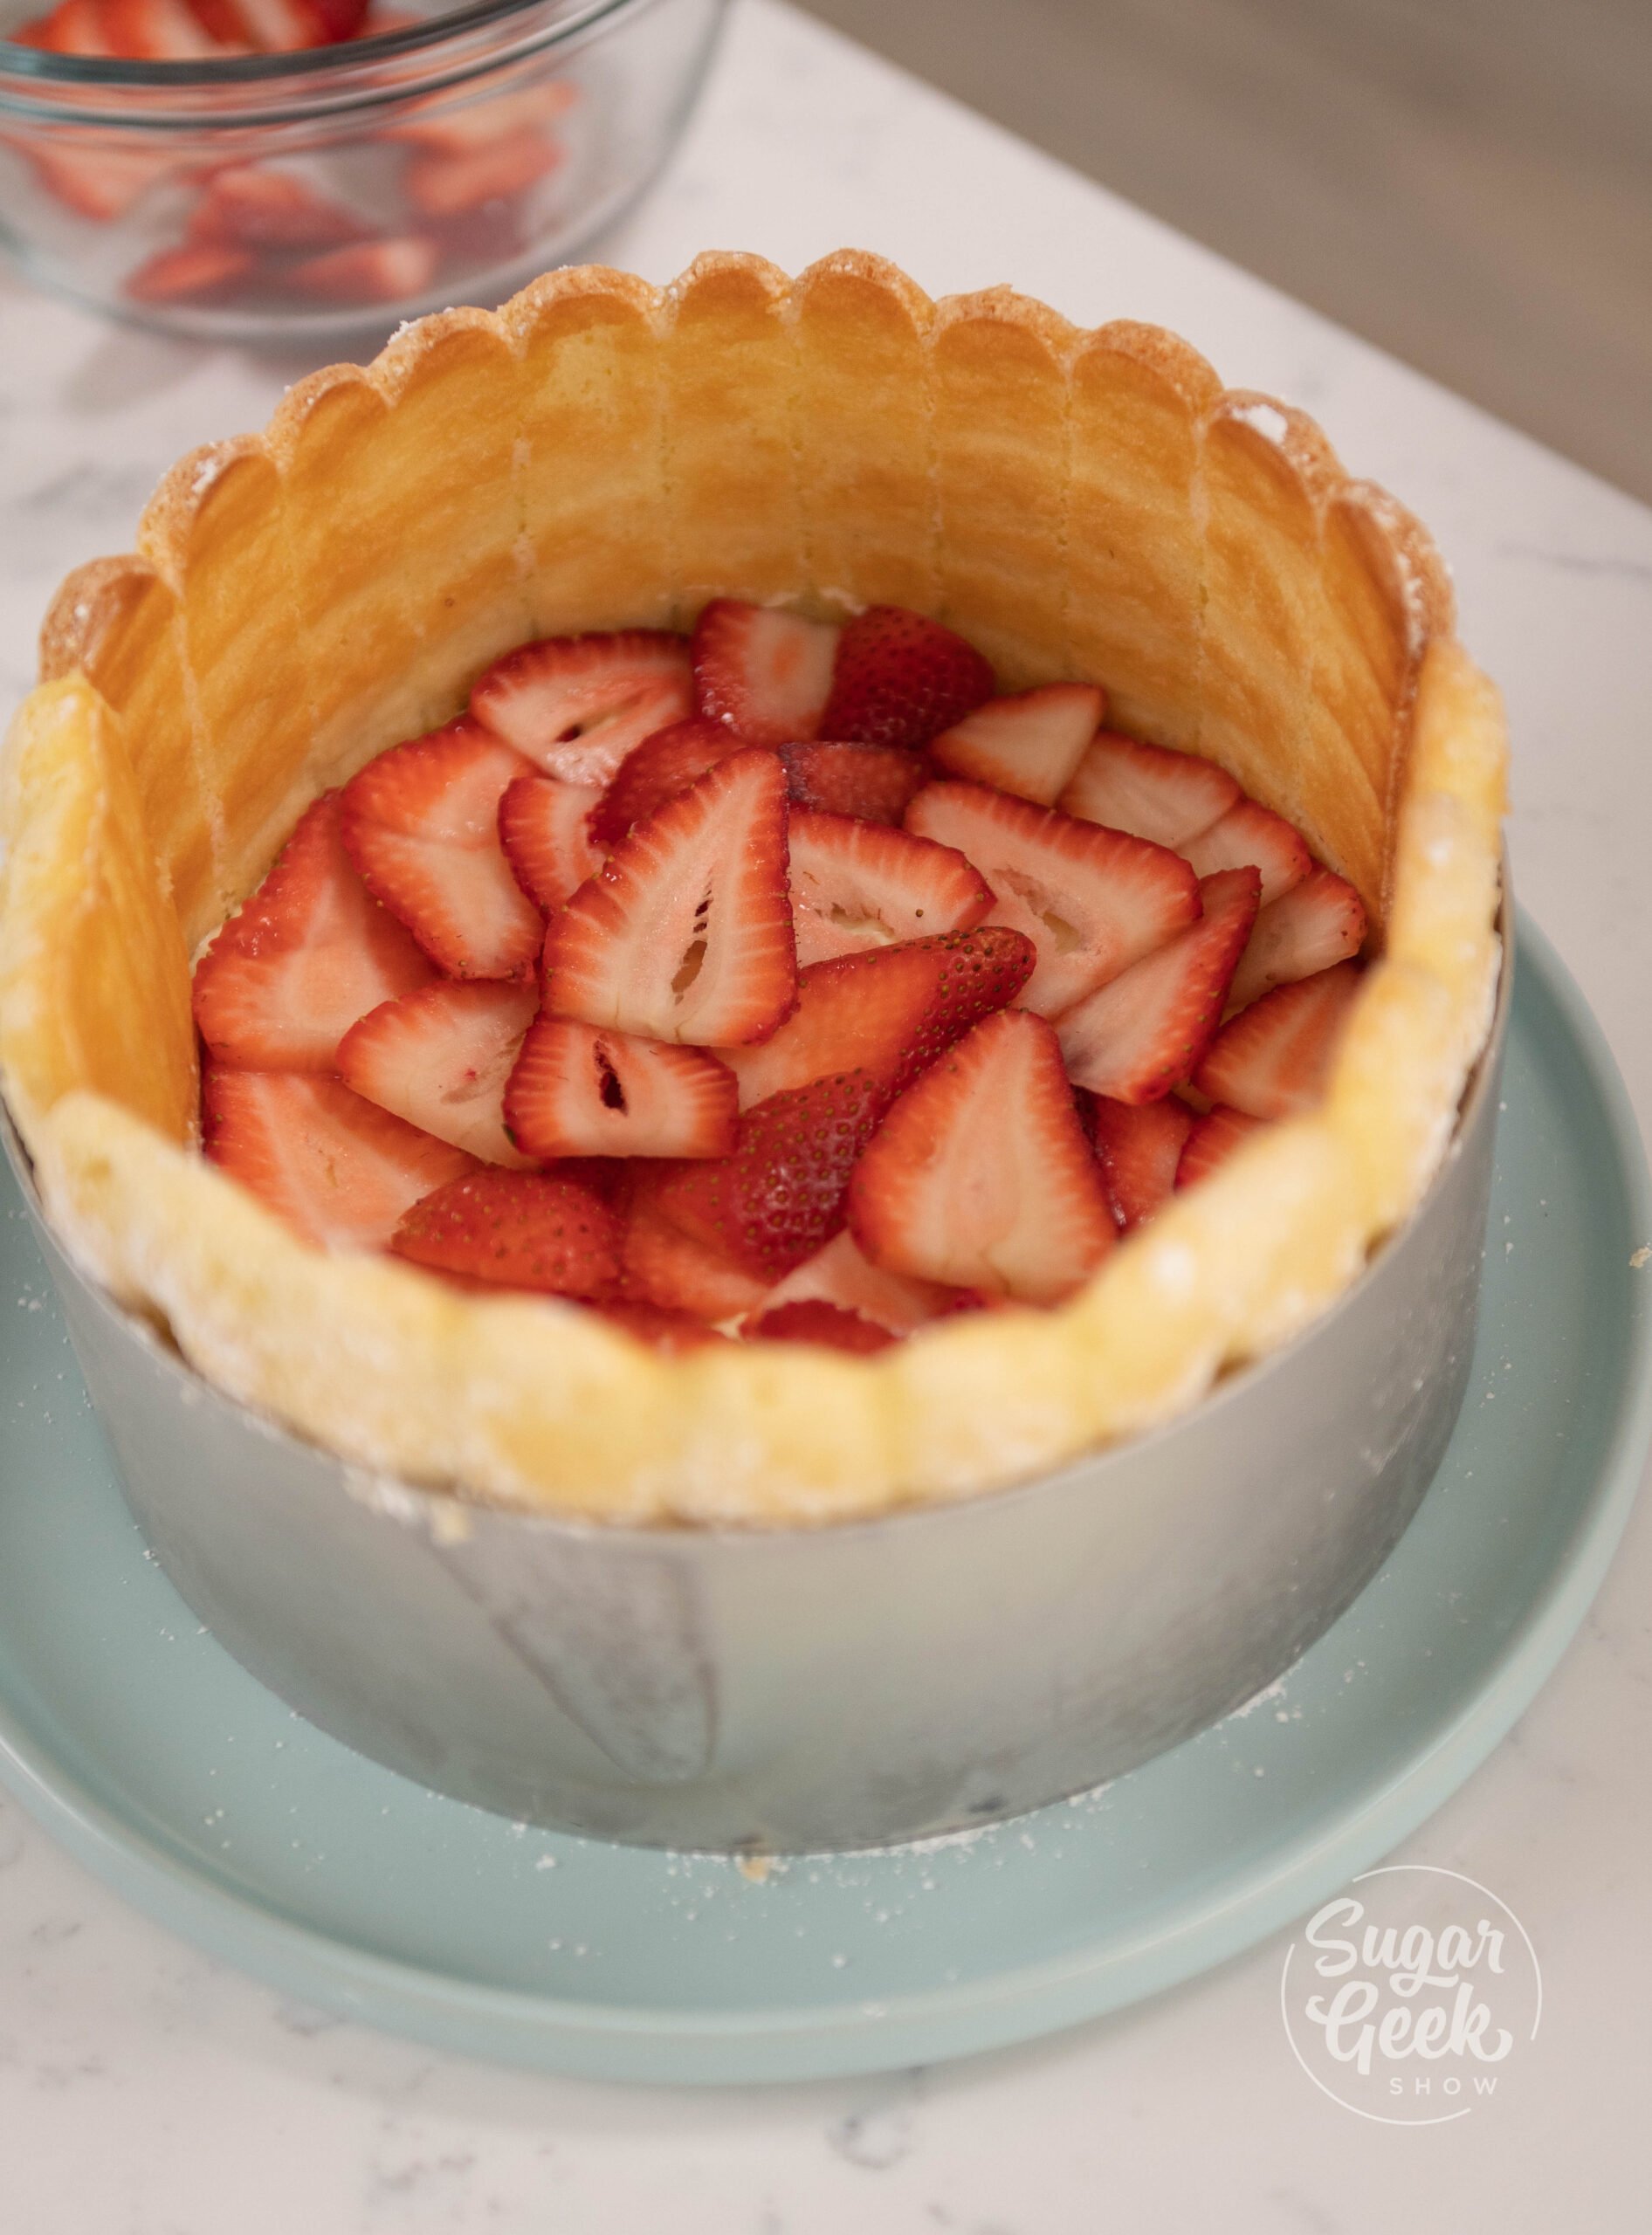 picture of strawberries inside cake